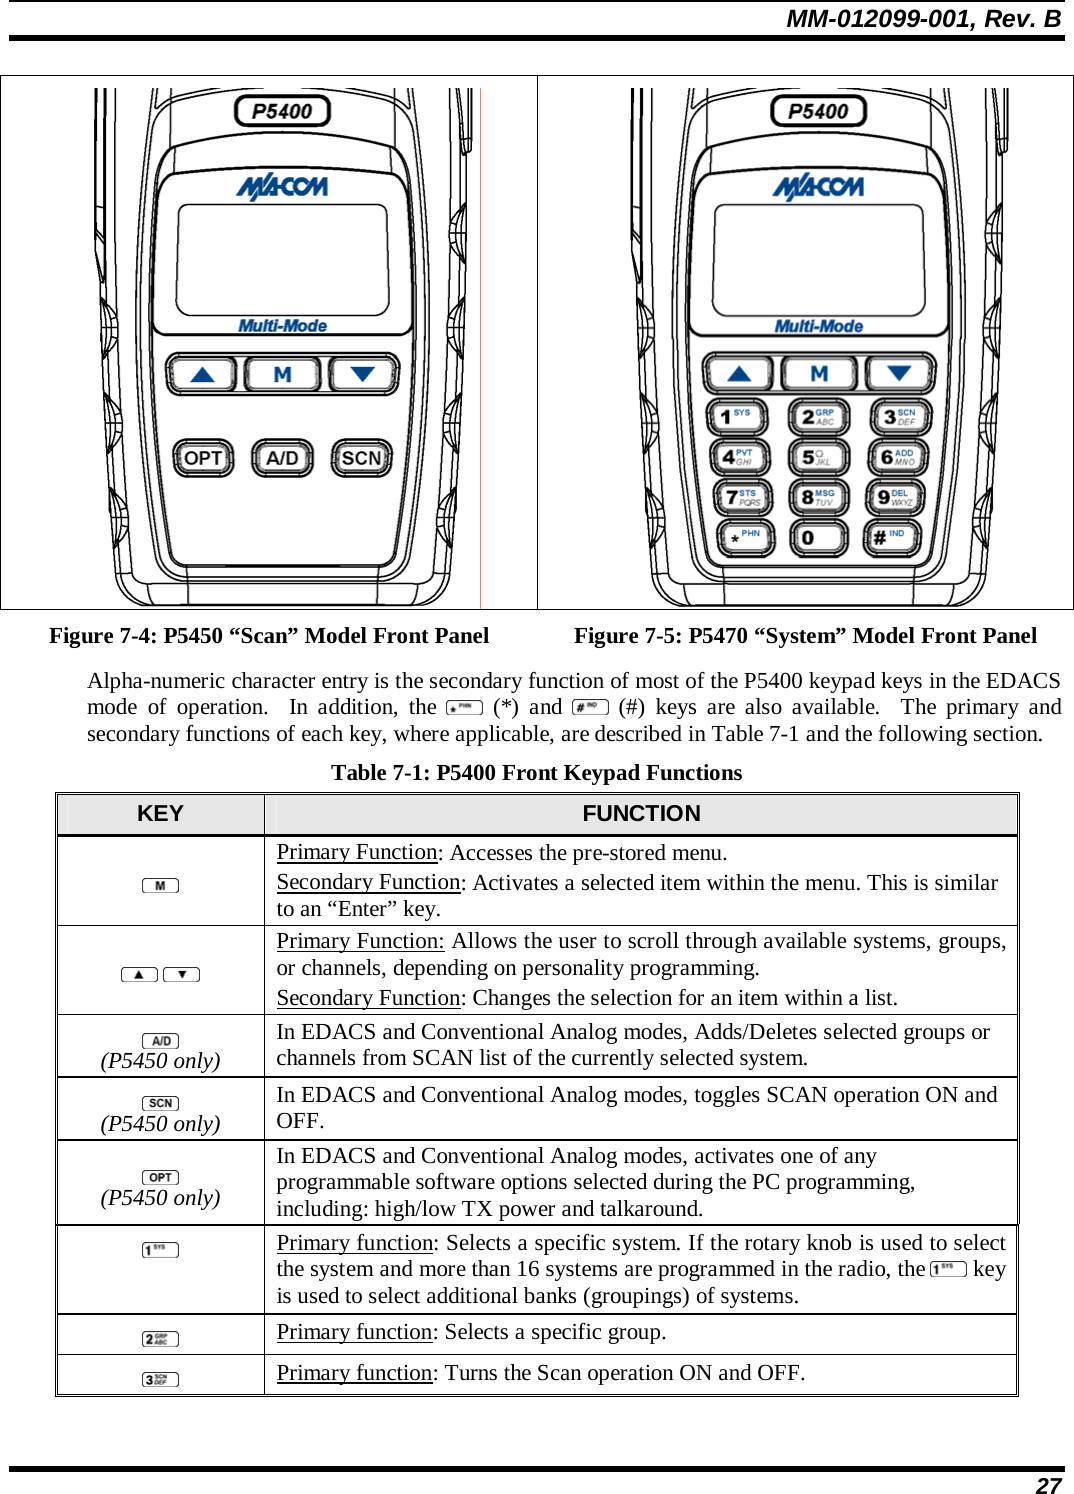 MM-012099-001, Rev. B 27   Figure 7-4: P5450 “Scan” Model Front Panel  Figure 7-5: P5470 “System” Model Front Panel Alpha-numeric character entry is the secondary function of most of the P5400 keypad keys in the EDACS mode of operation.  In addition, the   (*) and   (#) keys are also available.  The primary and secondary functions of each key, where applicable, are described in Table 7-1 and the following section. Table 7-1: P5400 Front Keypad Functions KEY  FUNCTION  Primary Function: Accesses the pre-stored menu.  Secondary Function: Activates a selected item within the menu. This is similar to an “Enter” key.    Primary Function: Allows the user to scroll through available systems, groups, or channels, depending on personality programming.  Secondary Function: Changes the selection for an item within a list.  (P5450 only) In EDACS and Conventional Analog modes, Adds/Deletes selected groups or channels from SCAN list of the currently selected system.    (P5450 only) In EDACS and Conventional Analog modes, toggles SCAN operation ON and OFF.    (P5450 only) In EDACS and Conventional Analog modes, activates one of any programmable software options selected during the PC programming, including: high/low TX power and talkaround.    Primary function: Selects a specific system. If the rotary knob is used to select the system and more than 16 systems are programmed in the radio, the   key is used to select additional banks (groupings) of systems.  Primary function: Selects a specific group.  Primary function: Turns the Scan operation ON and OFF. 